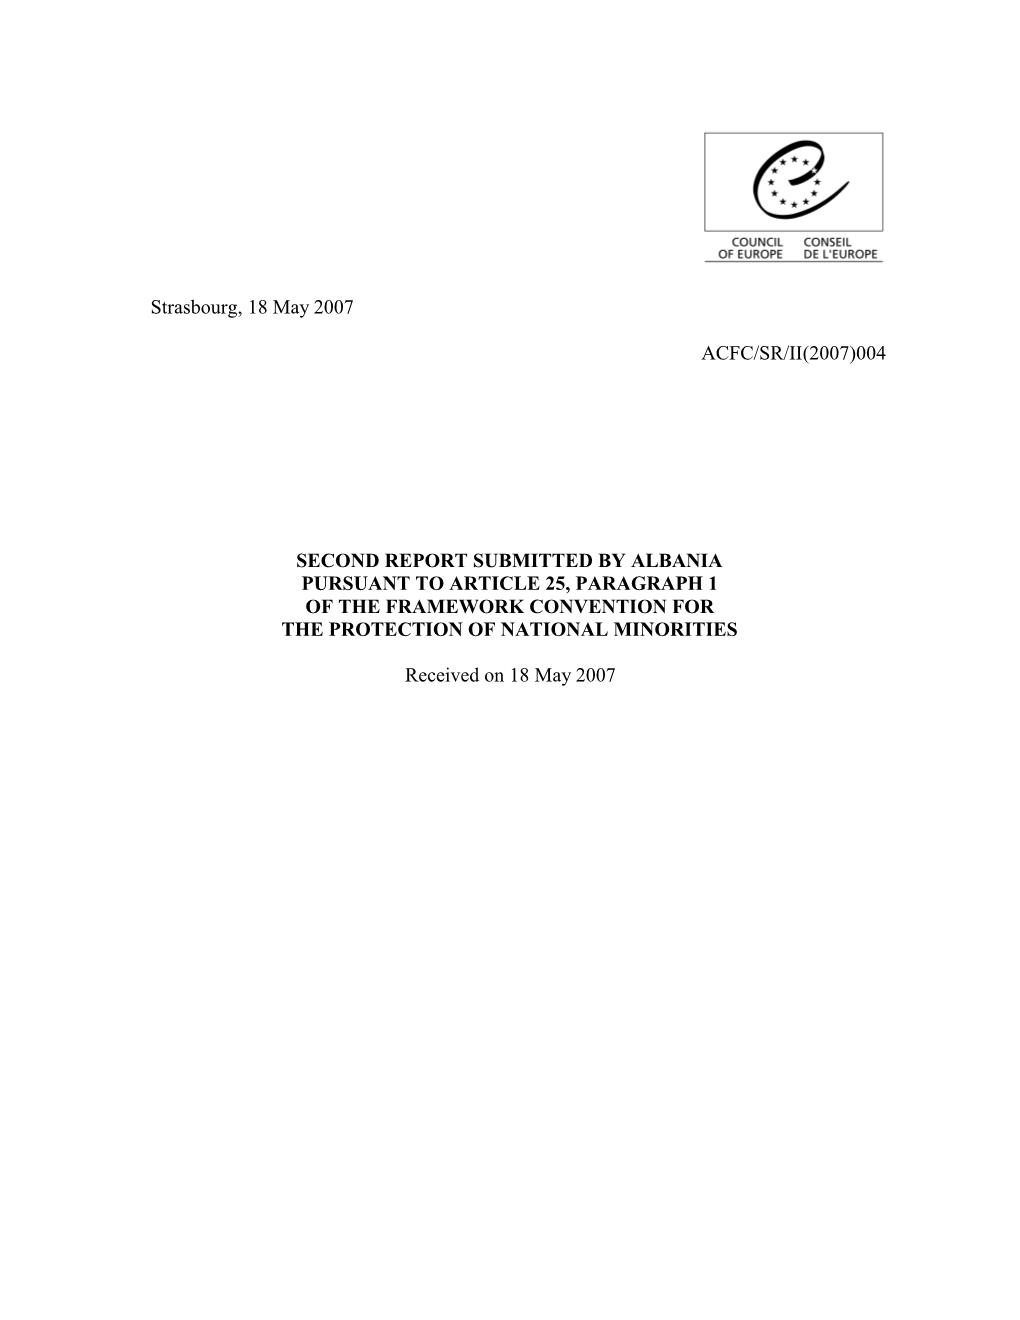 004 Second Report Submitted by Albania Pursuant To